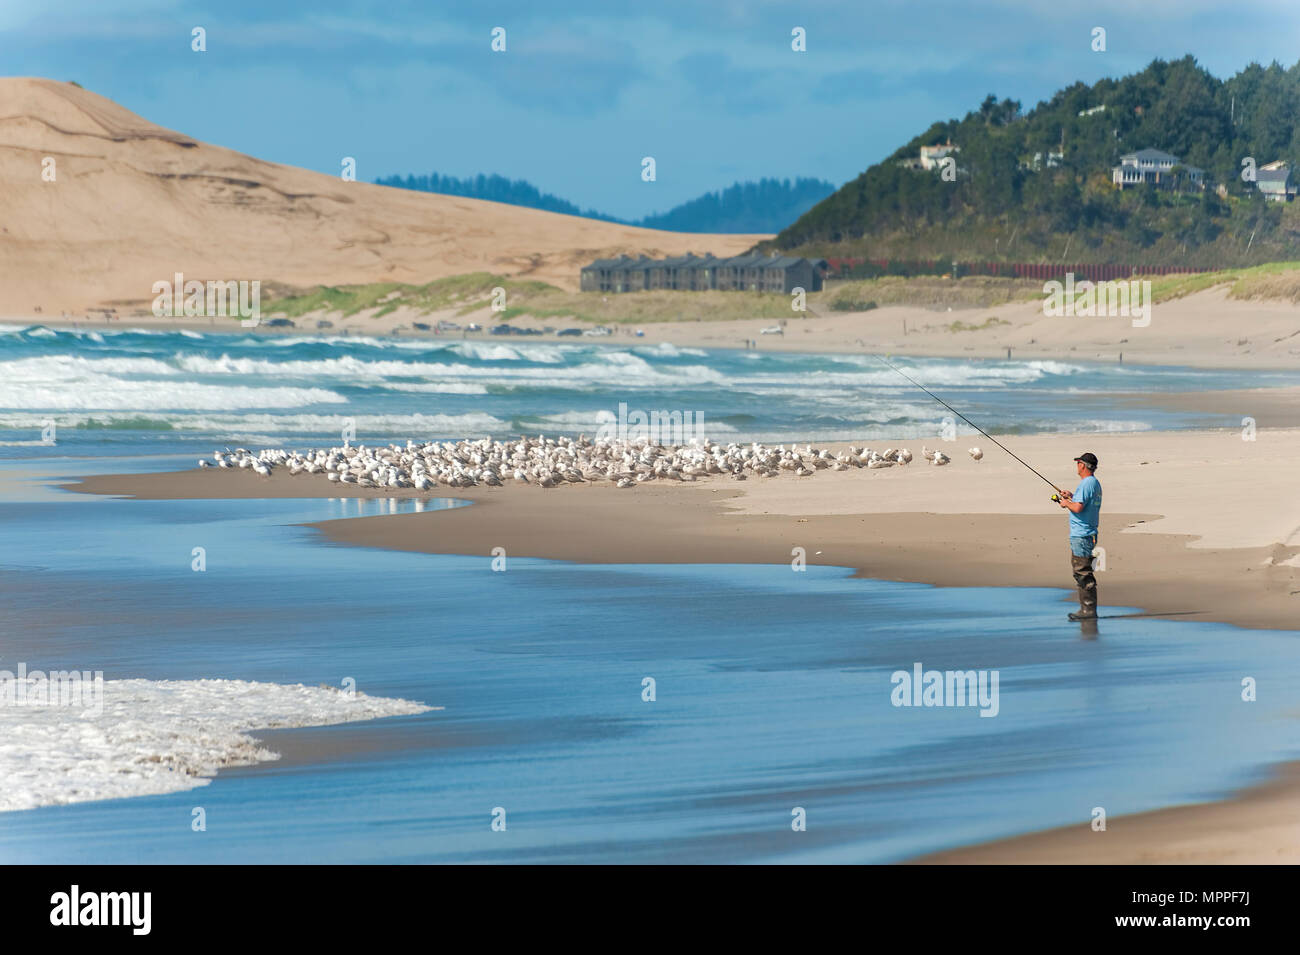 A view of the beach at Pacific City.  A fisherman can be seen wearing waders fishing in the surf. Stock Photo